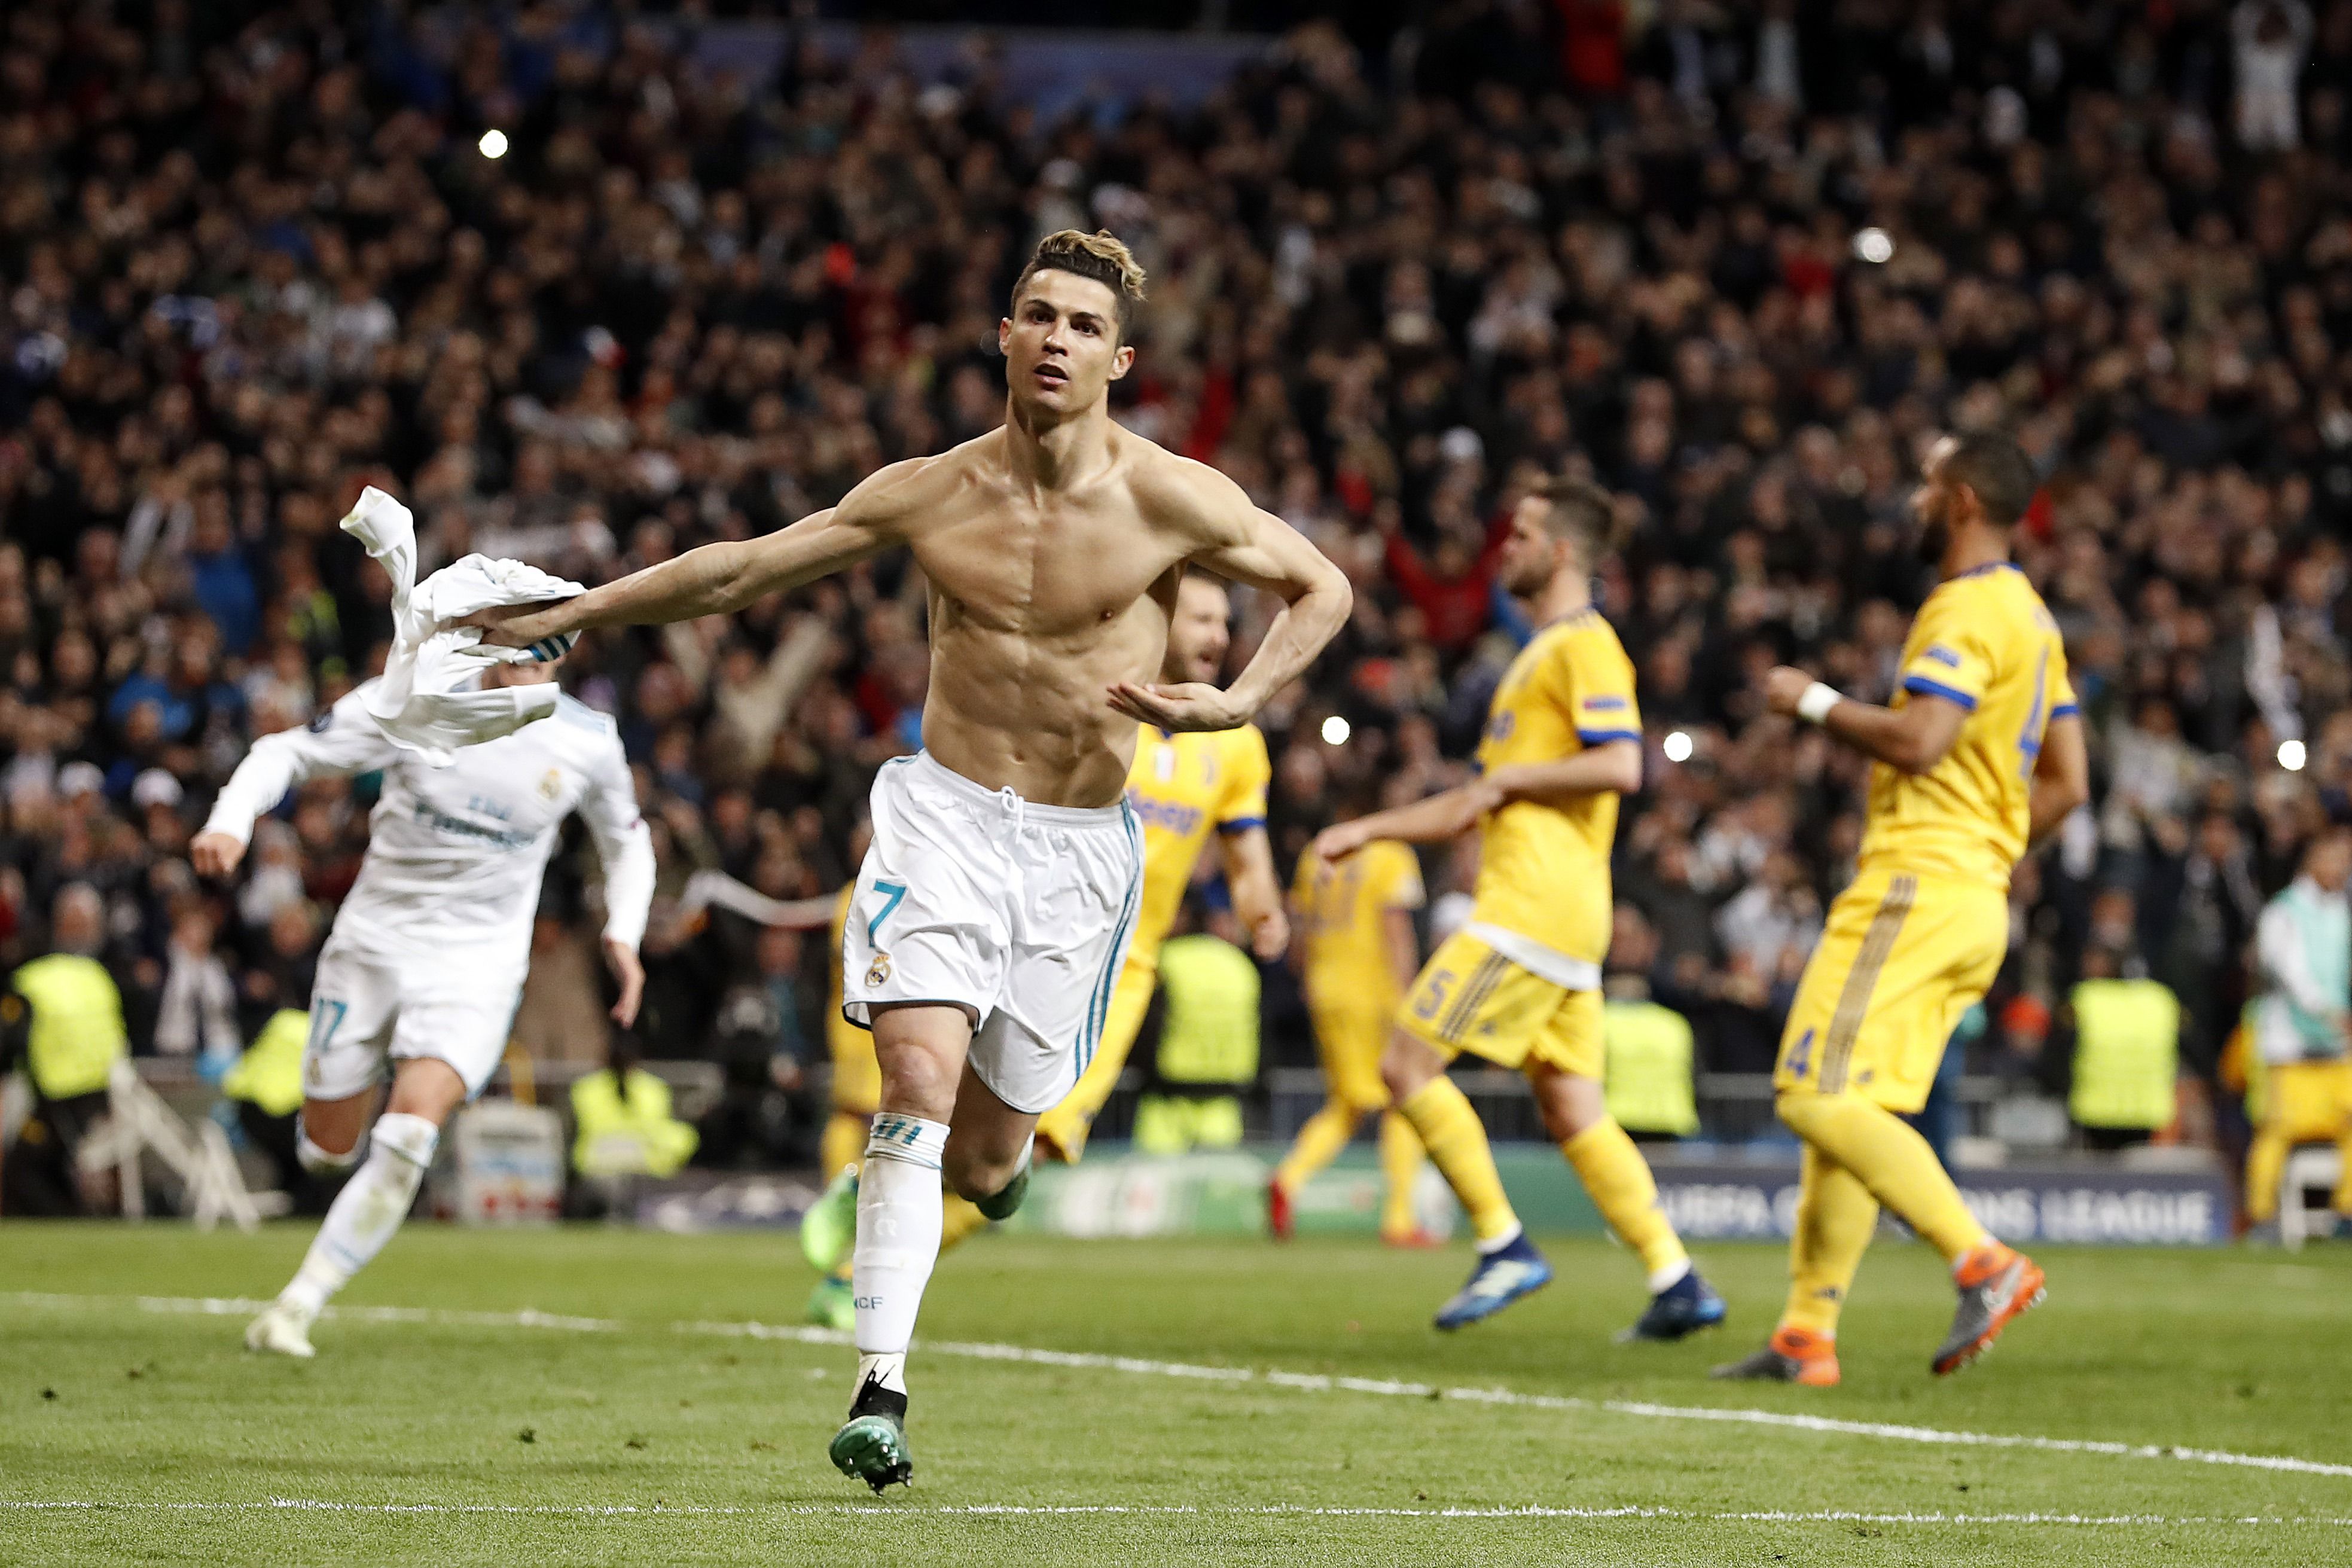 Ah, So This Is How You Can Get Cristiano Ronaldo's Abs